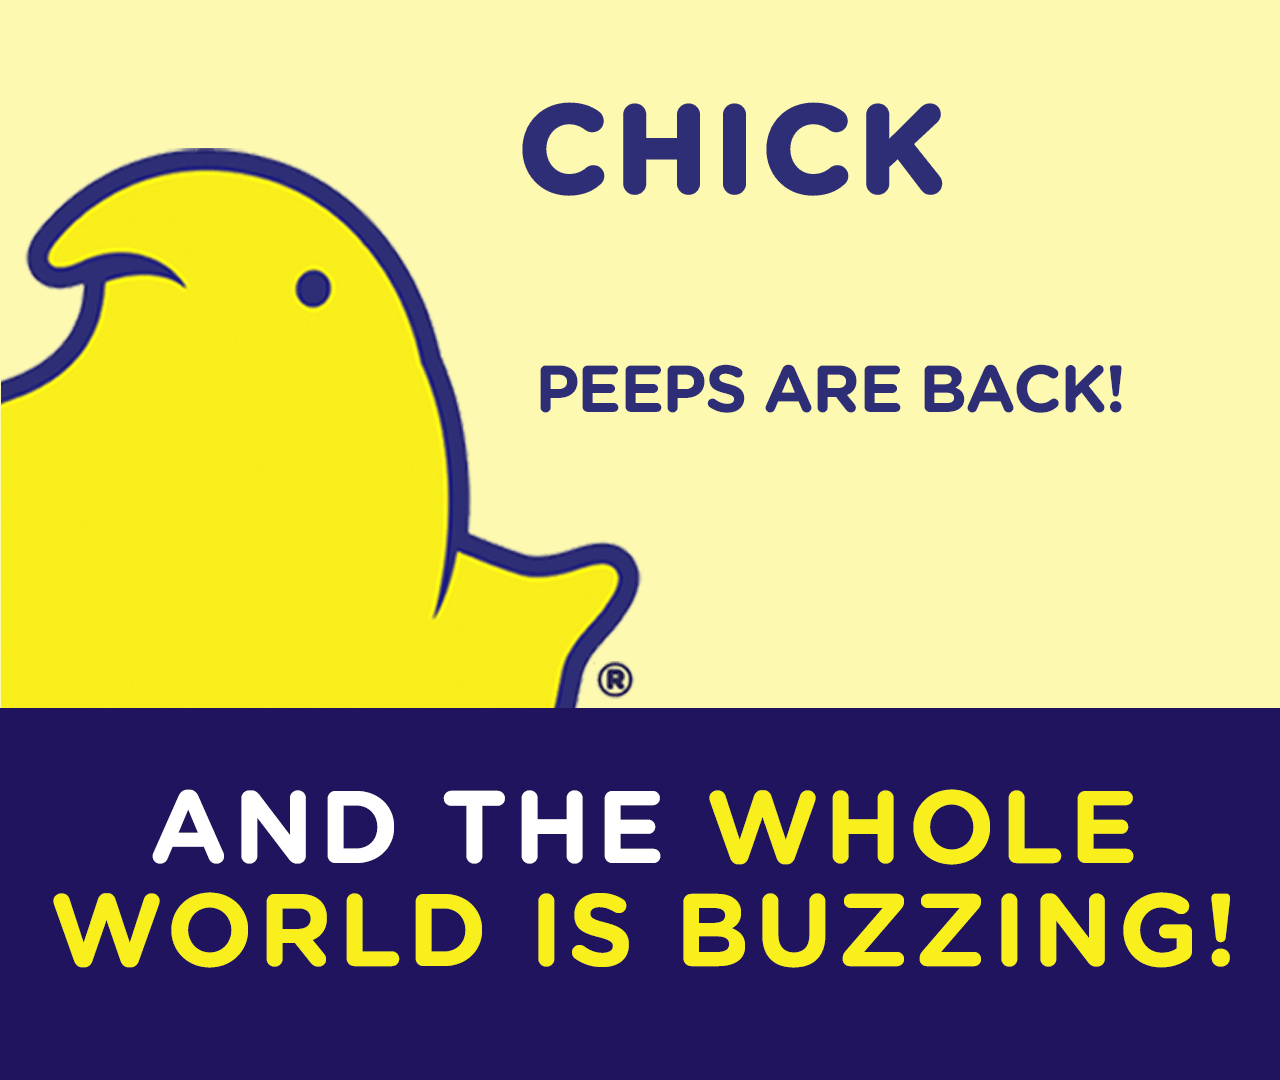 A Sweet Return to Normal - PEEPS® are Back!